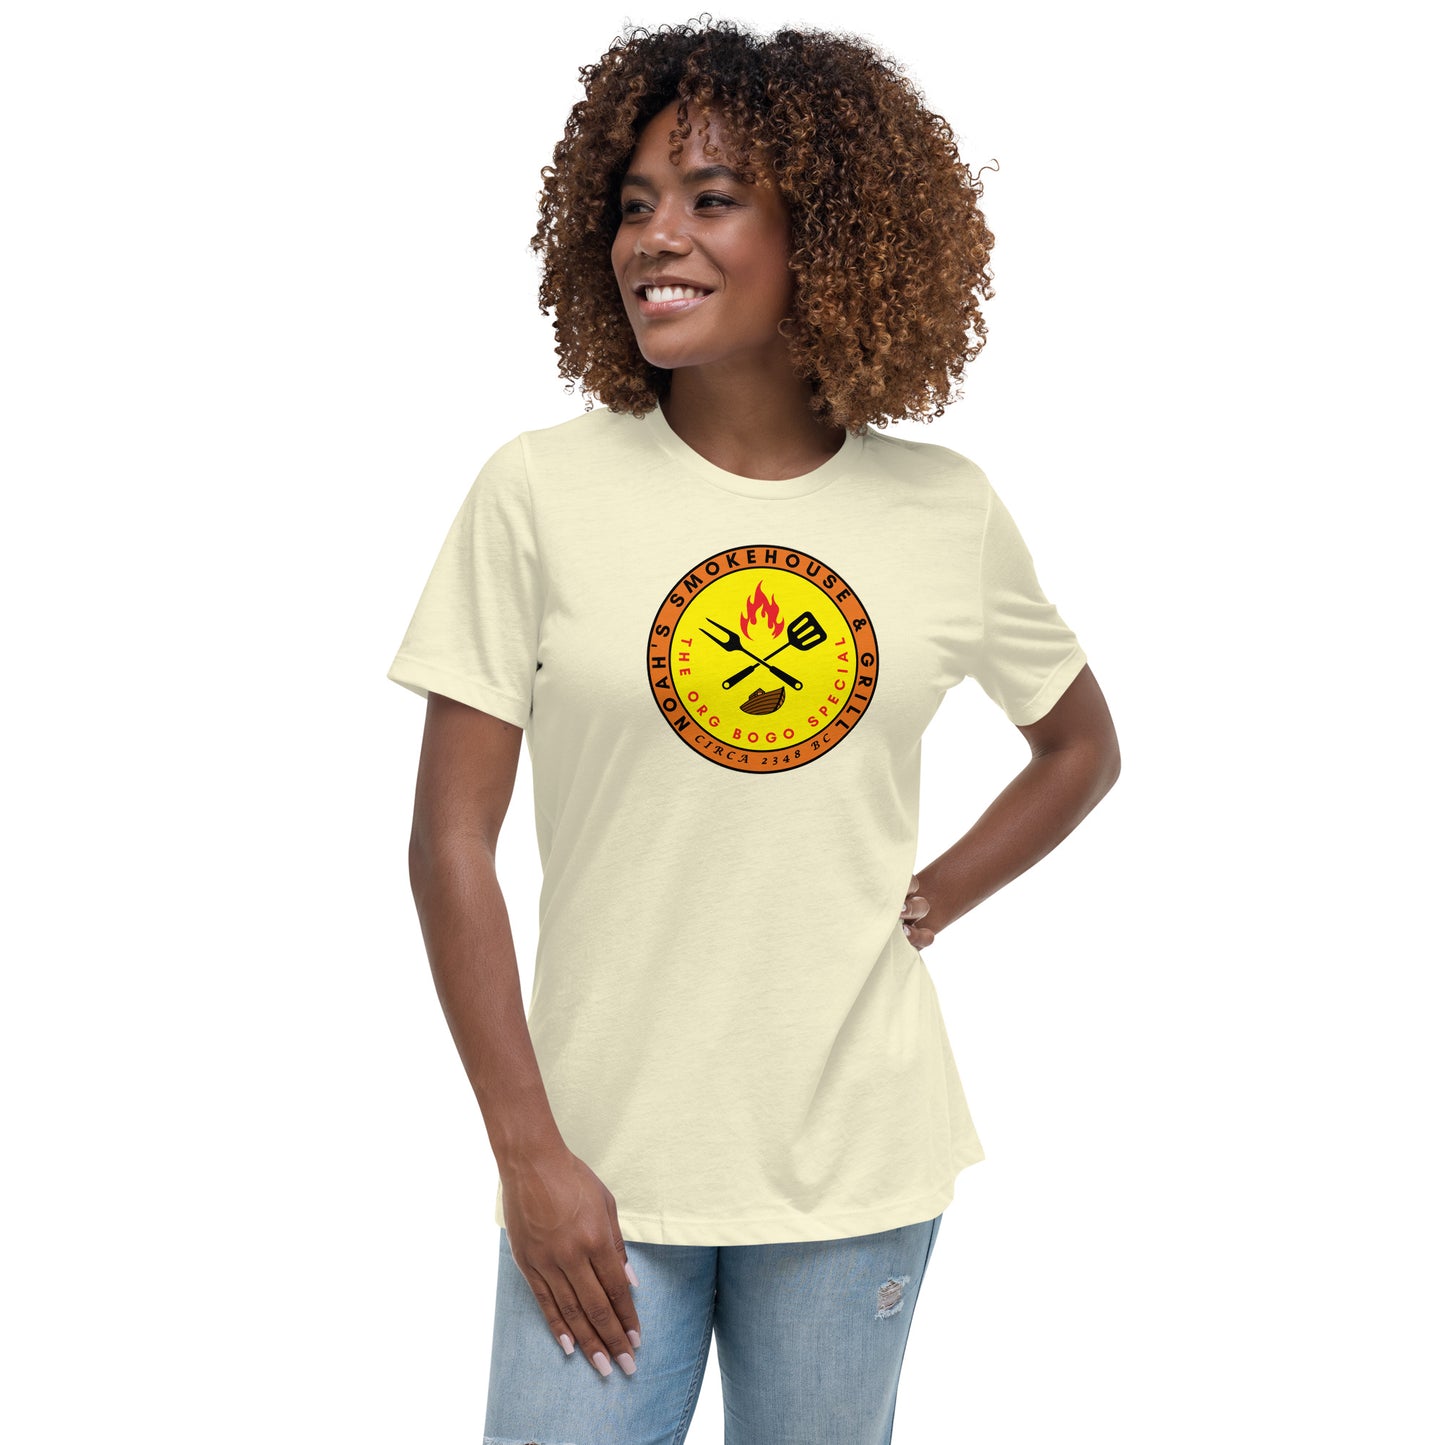 Noah's Smokehouse & Grill - The Org BOGO Special Circa 2348 BC Women's Relaxed T-Shirt